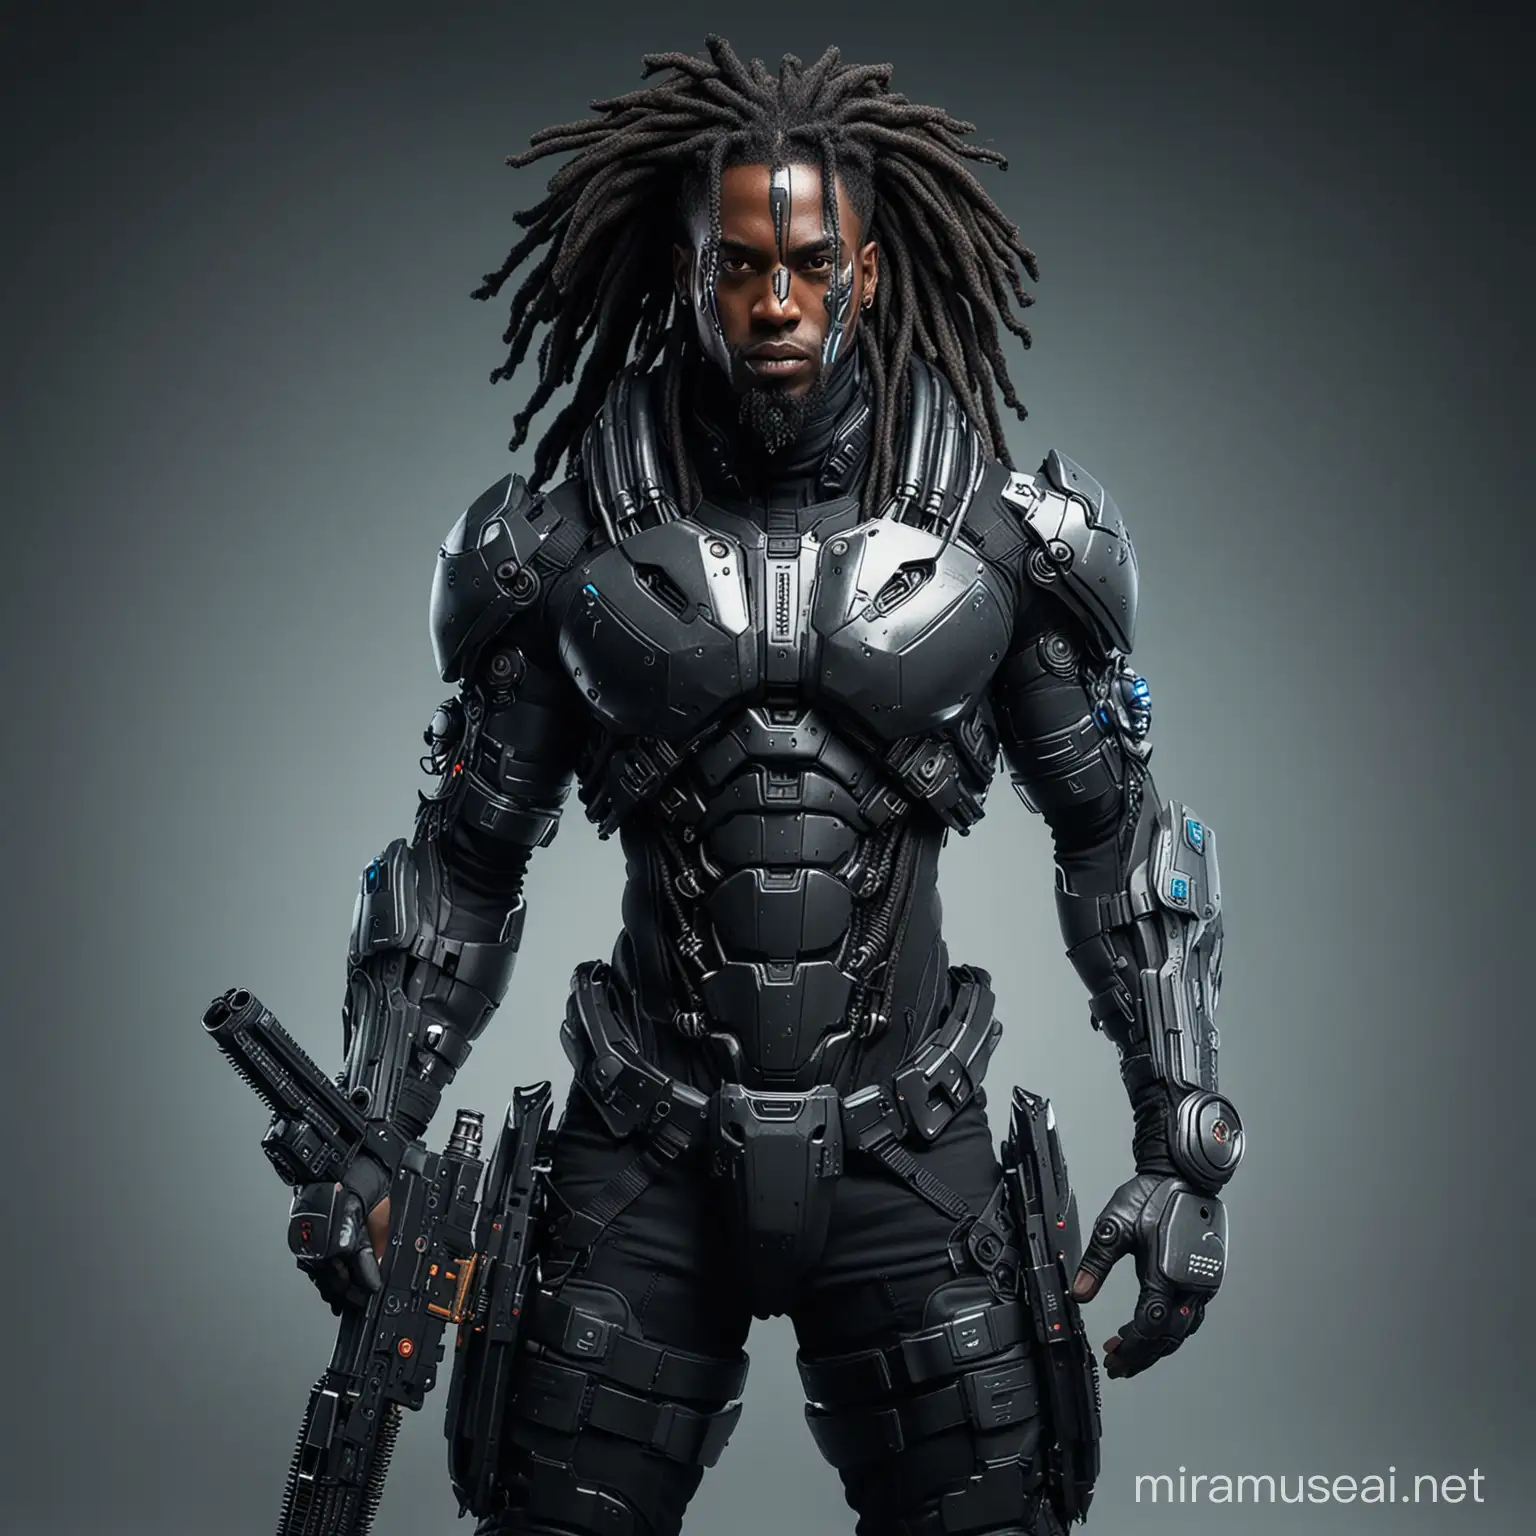 a black futuristic super soldier with dreadlocks holding a futuristic weapon. On his face, is an advanced cyberpunk mask that he uses for vision and breathing. Full body photo 